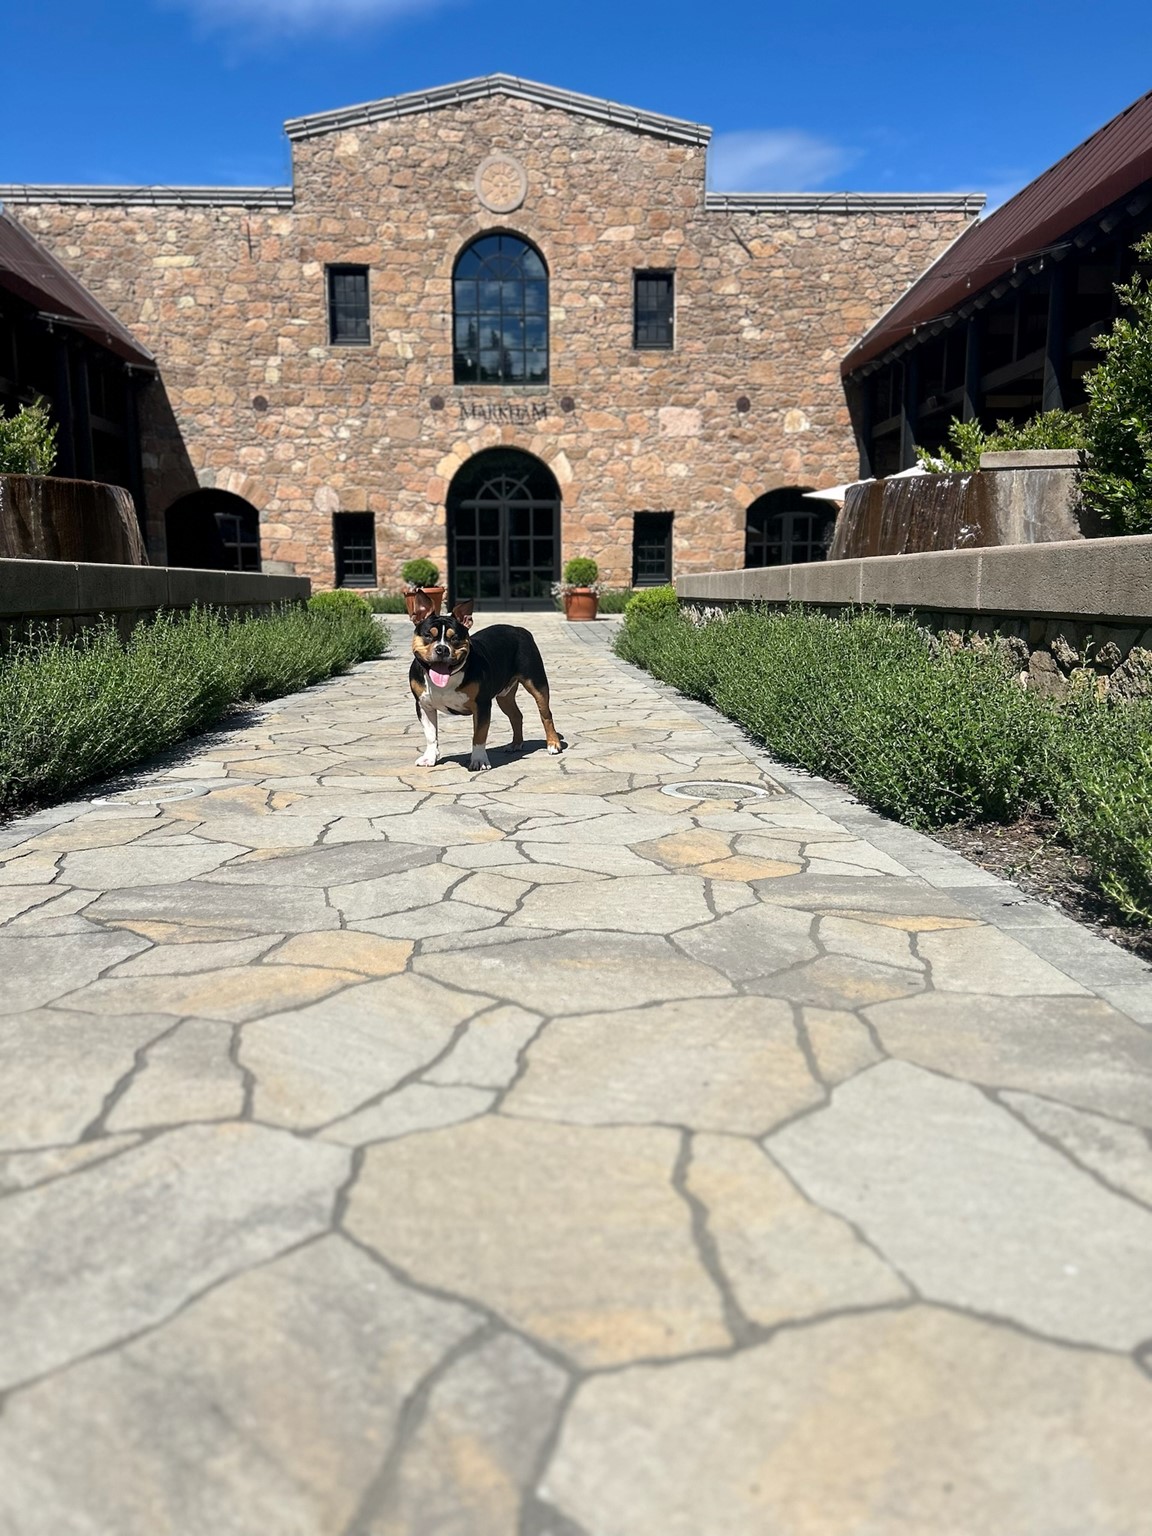 A dog in Markham Winery Tasting Room in St. Helena